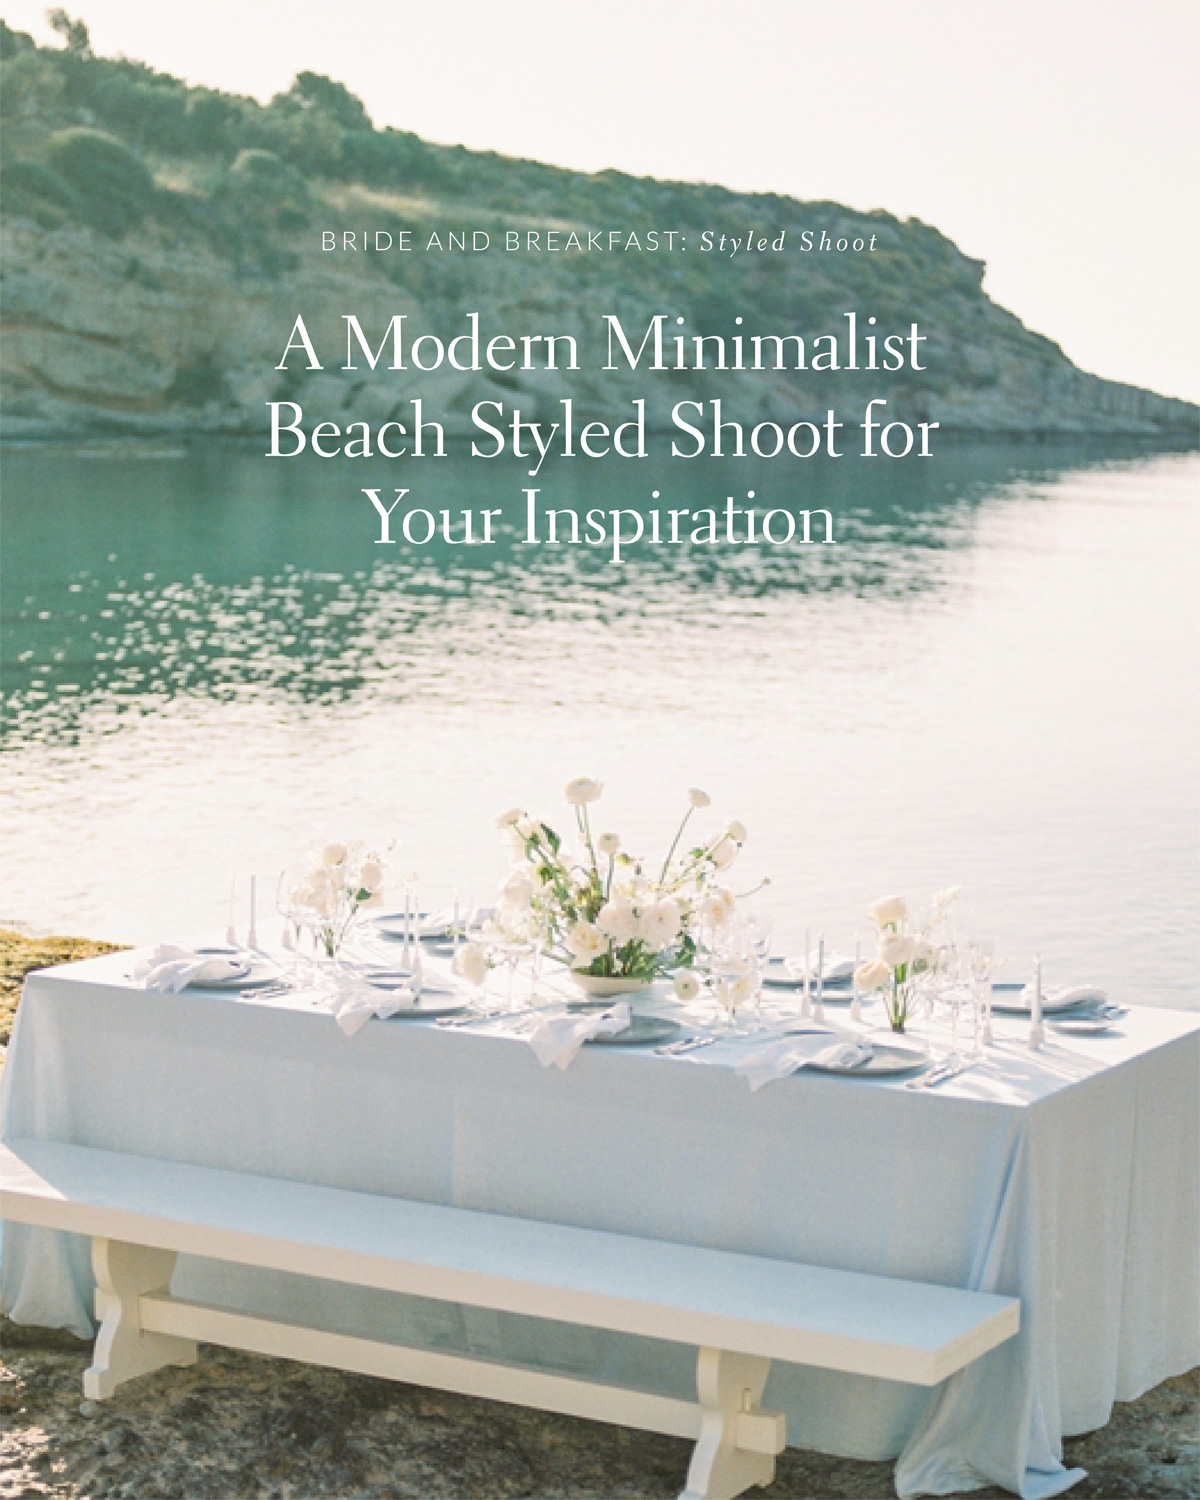 A Modern Minimalist Beach Styled Shoot for Your Inspiration!